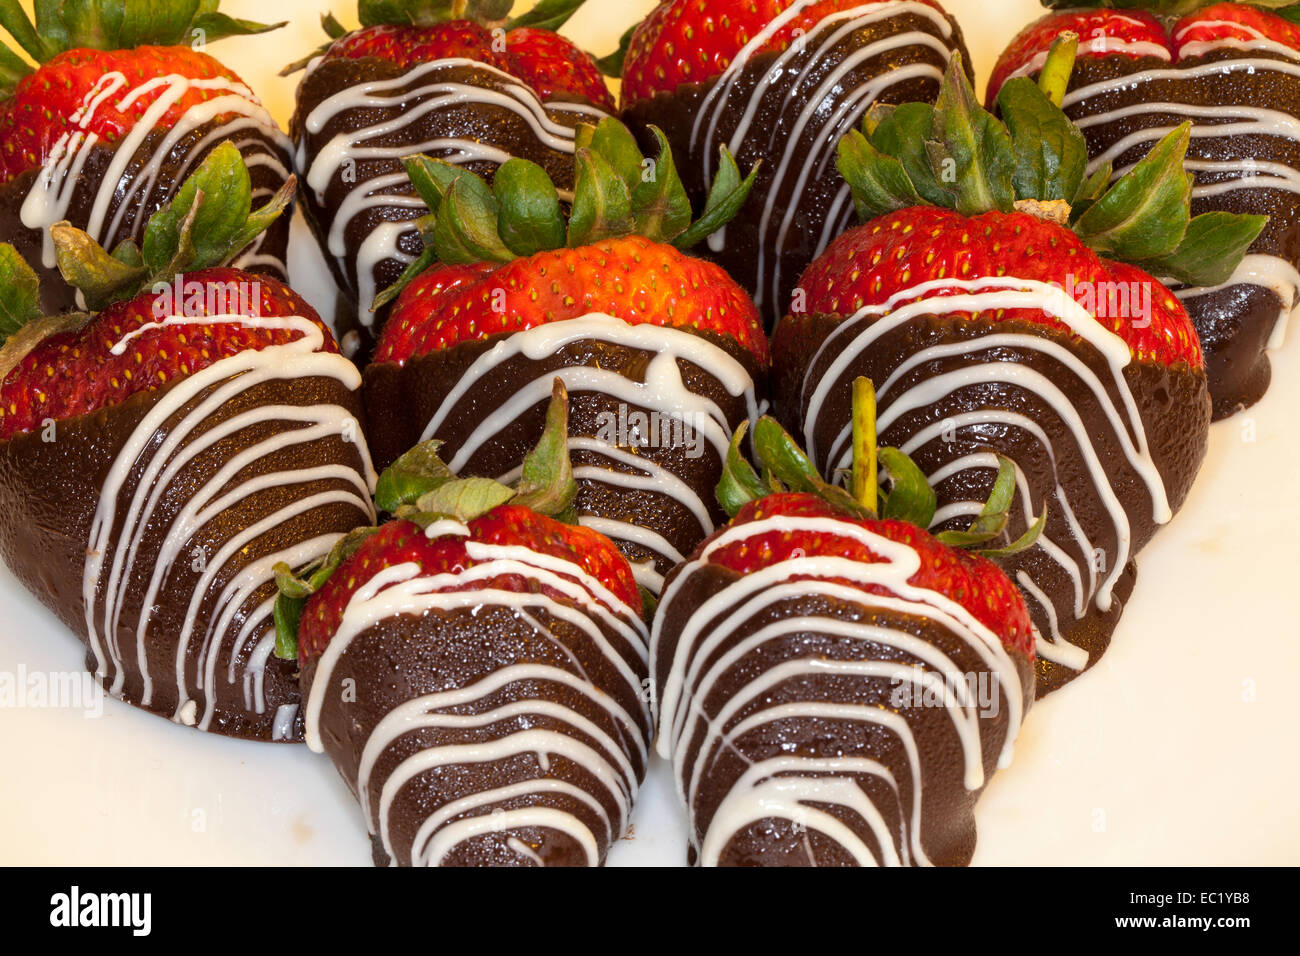 Dessert plate with chocolate covered strawberries Stock Photo